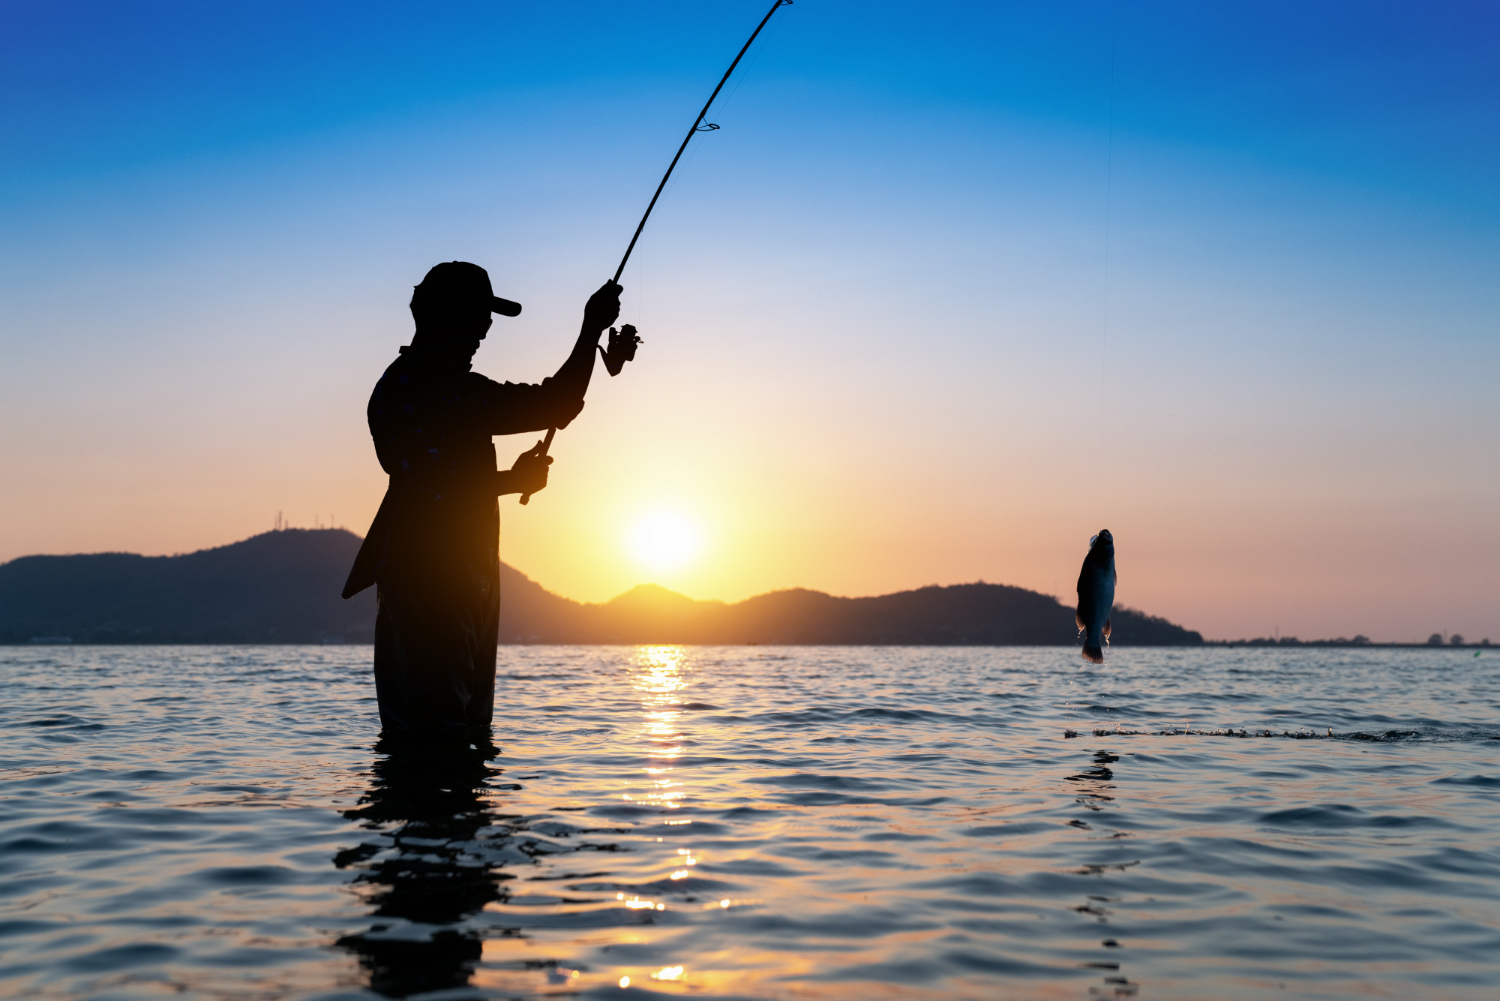 fisherman throwing his rod into a fishing lake with beautiful morning sunset